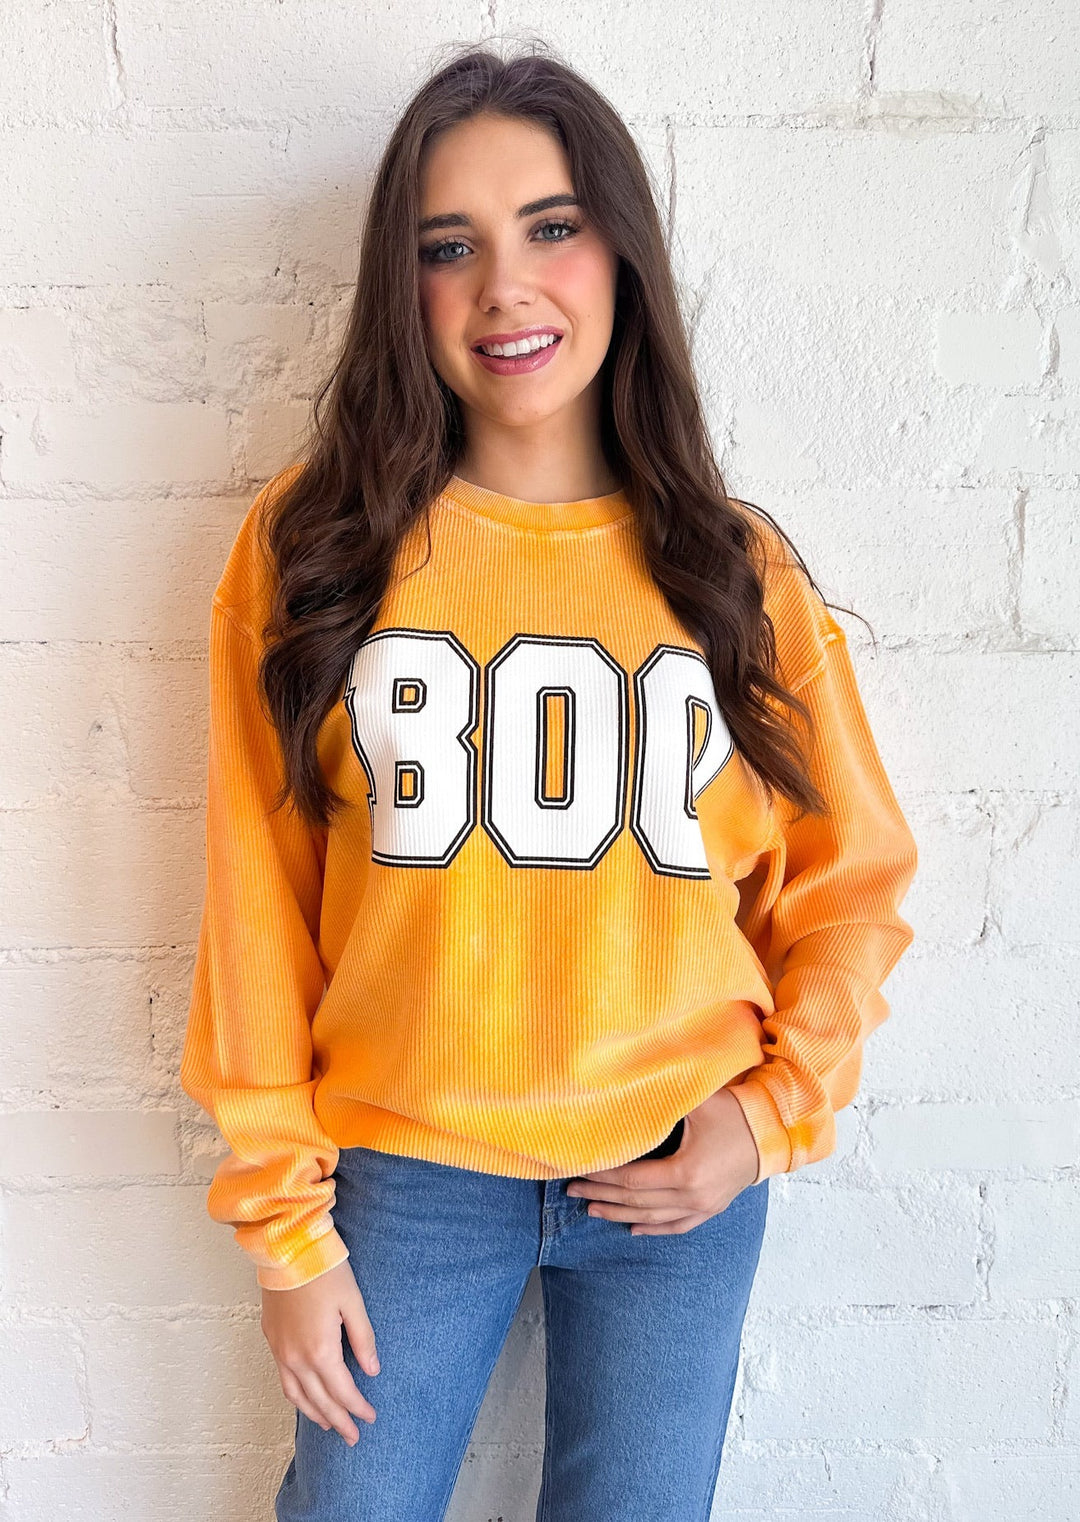 Boo Corded Sweatshirt, Tops, Adeline, Adeline, dallas boutique, dallas texas, texas boutique, women's boutique dallas, adeline boutique, dallas boutique, trendy boutique, affordable boutique